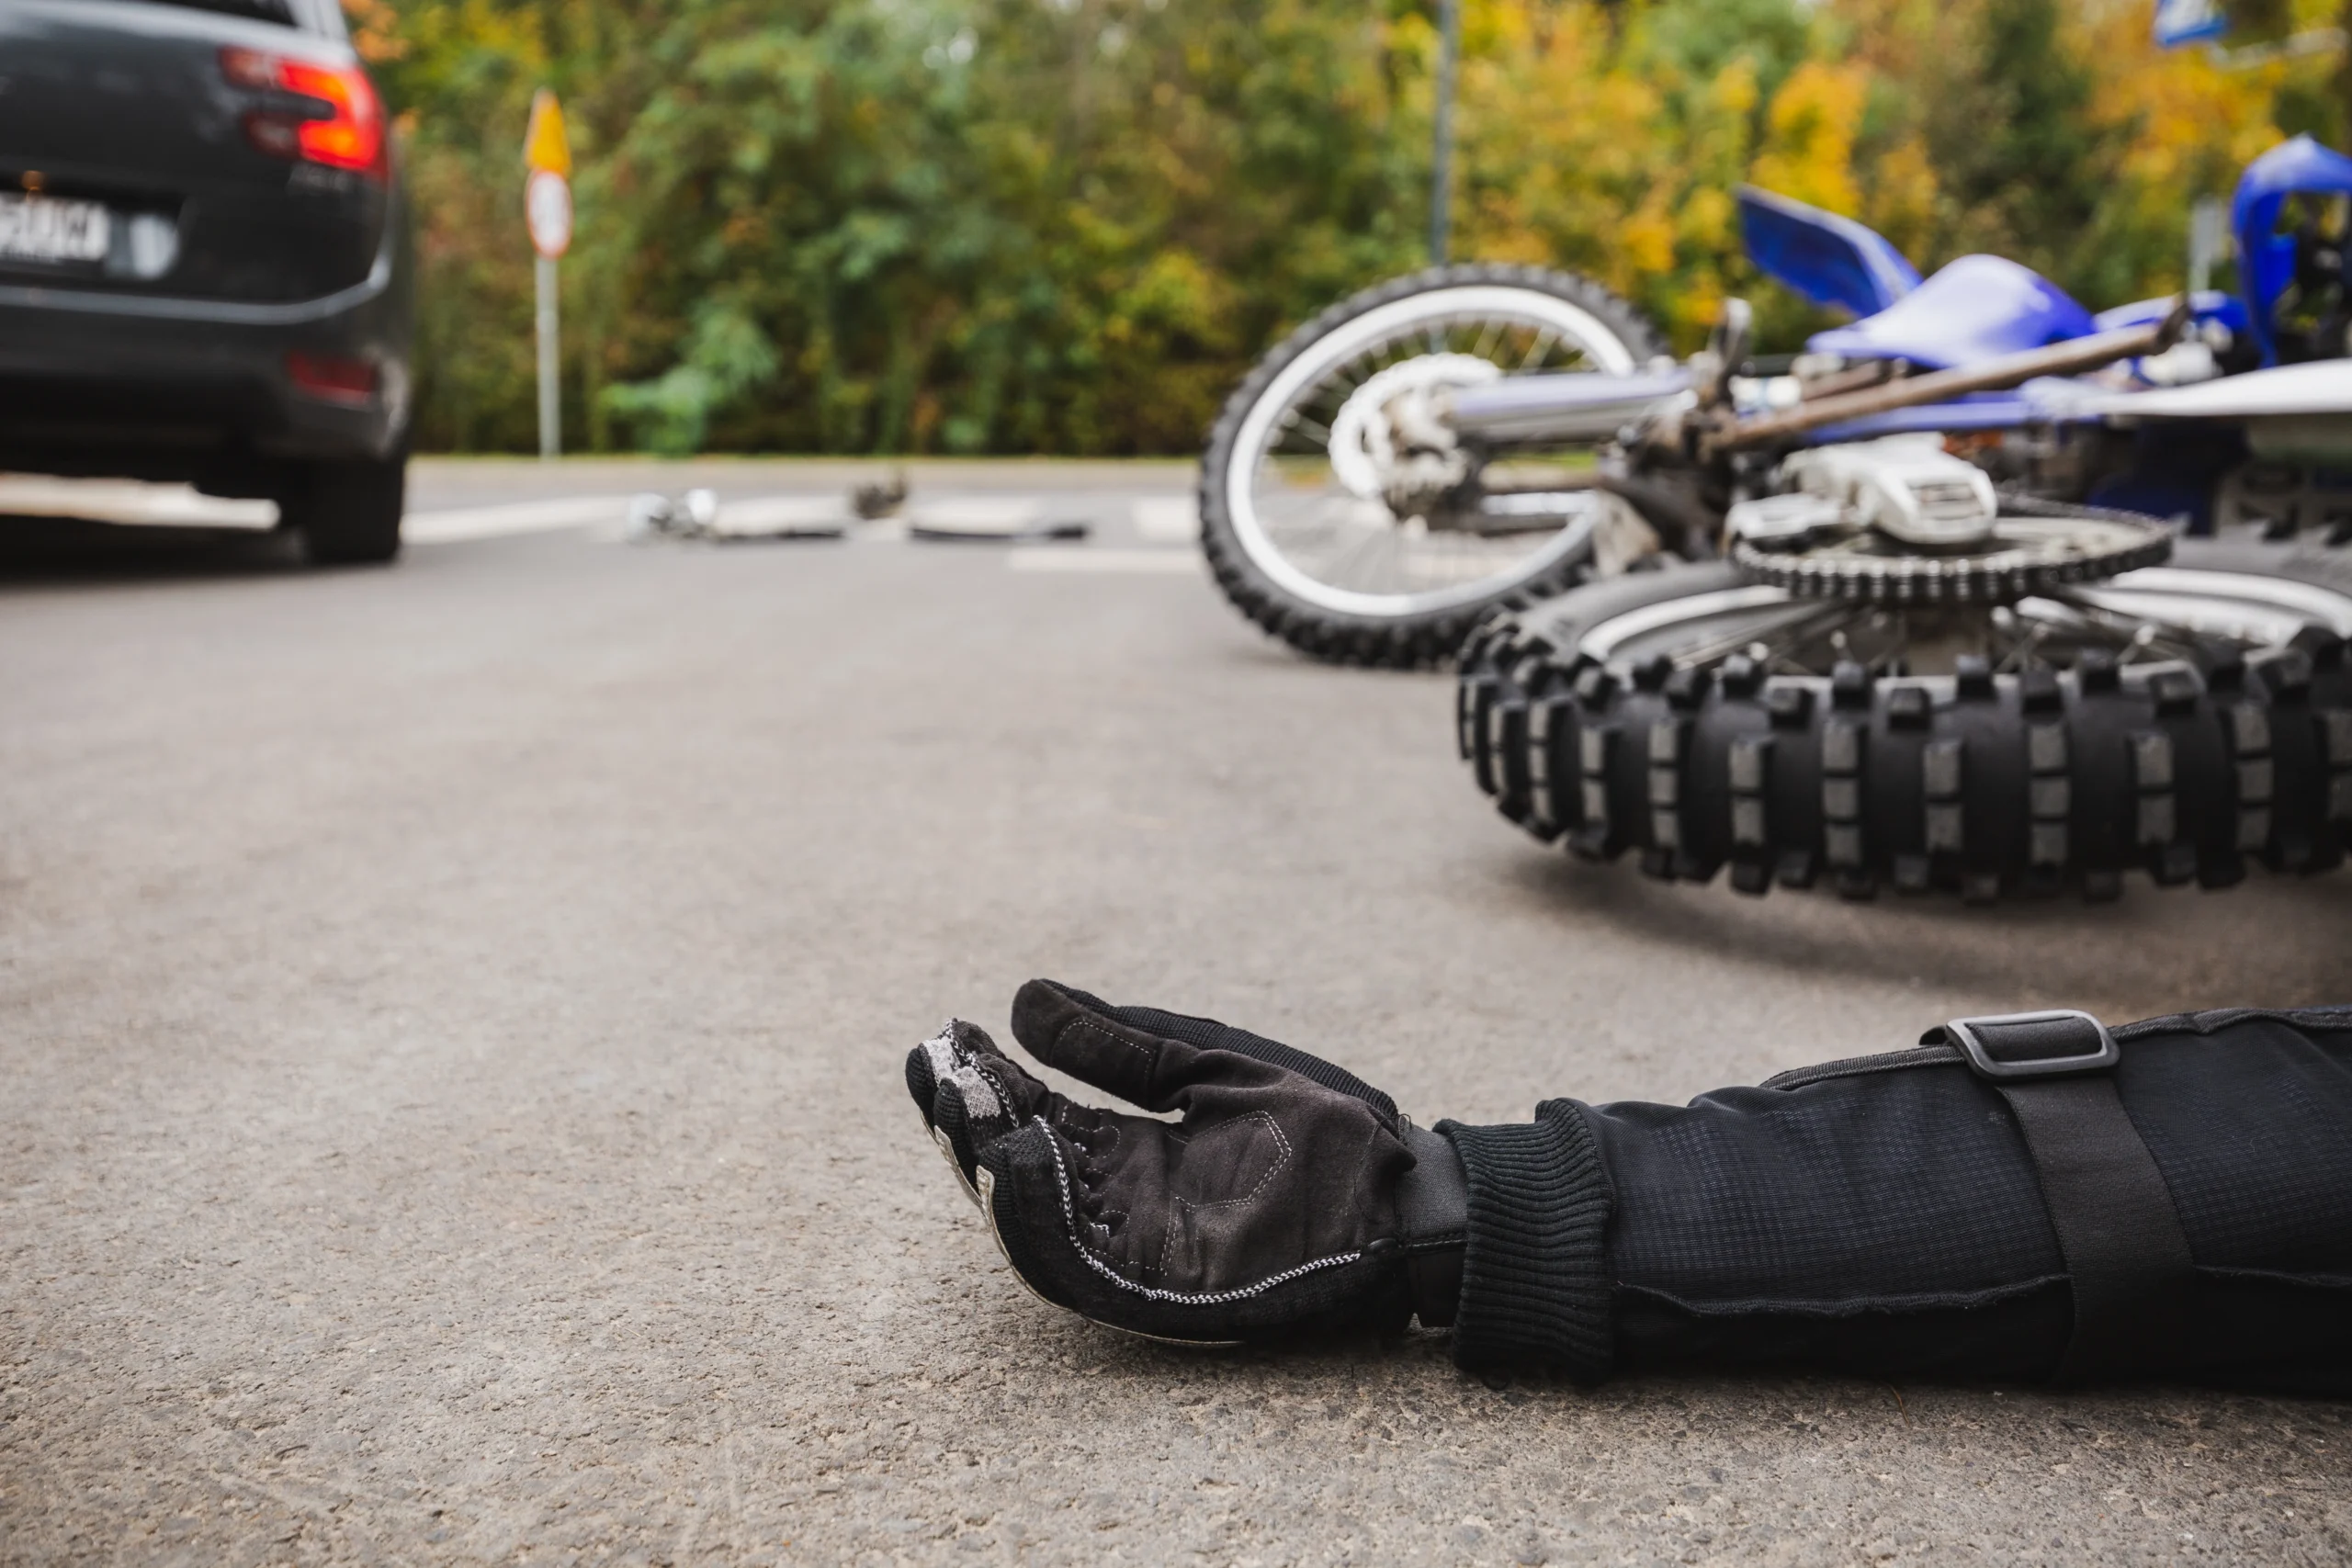 Indianapolis Motorcycle Left-Turn Accident Lawyer